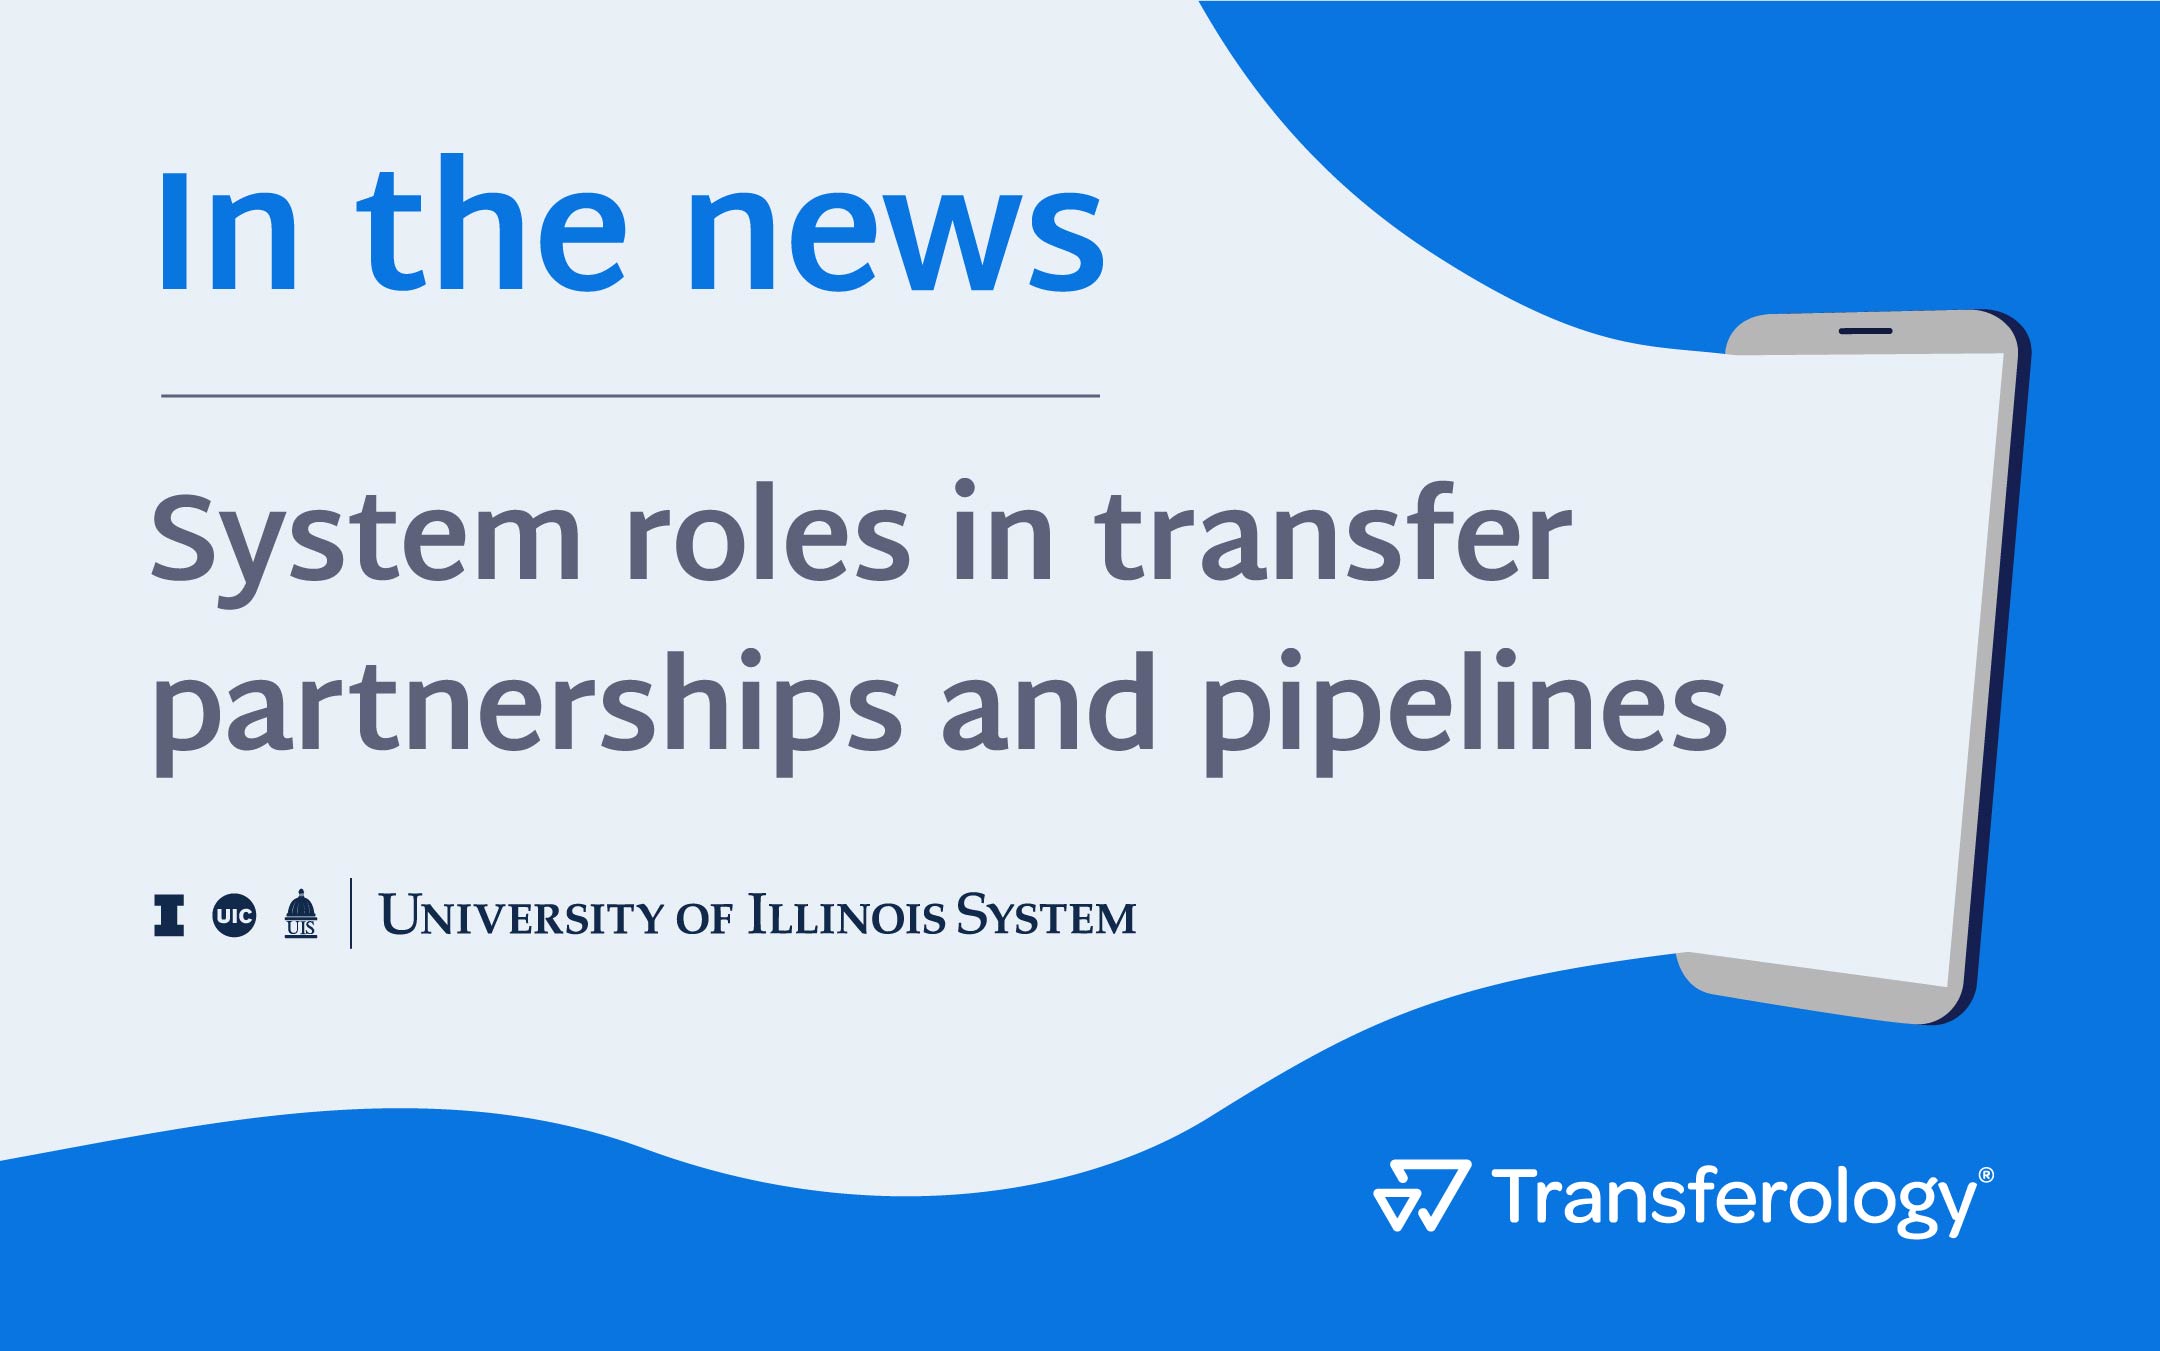 in-the-news-system-roles-transfer-illinois-partnerships